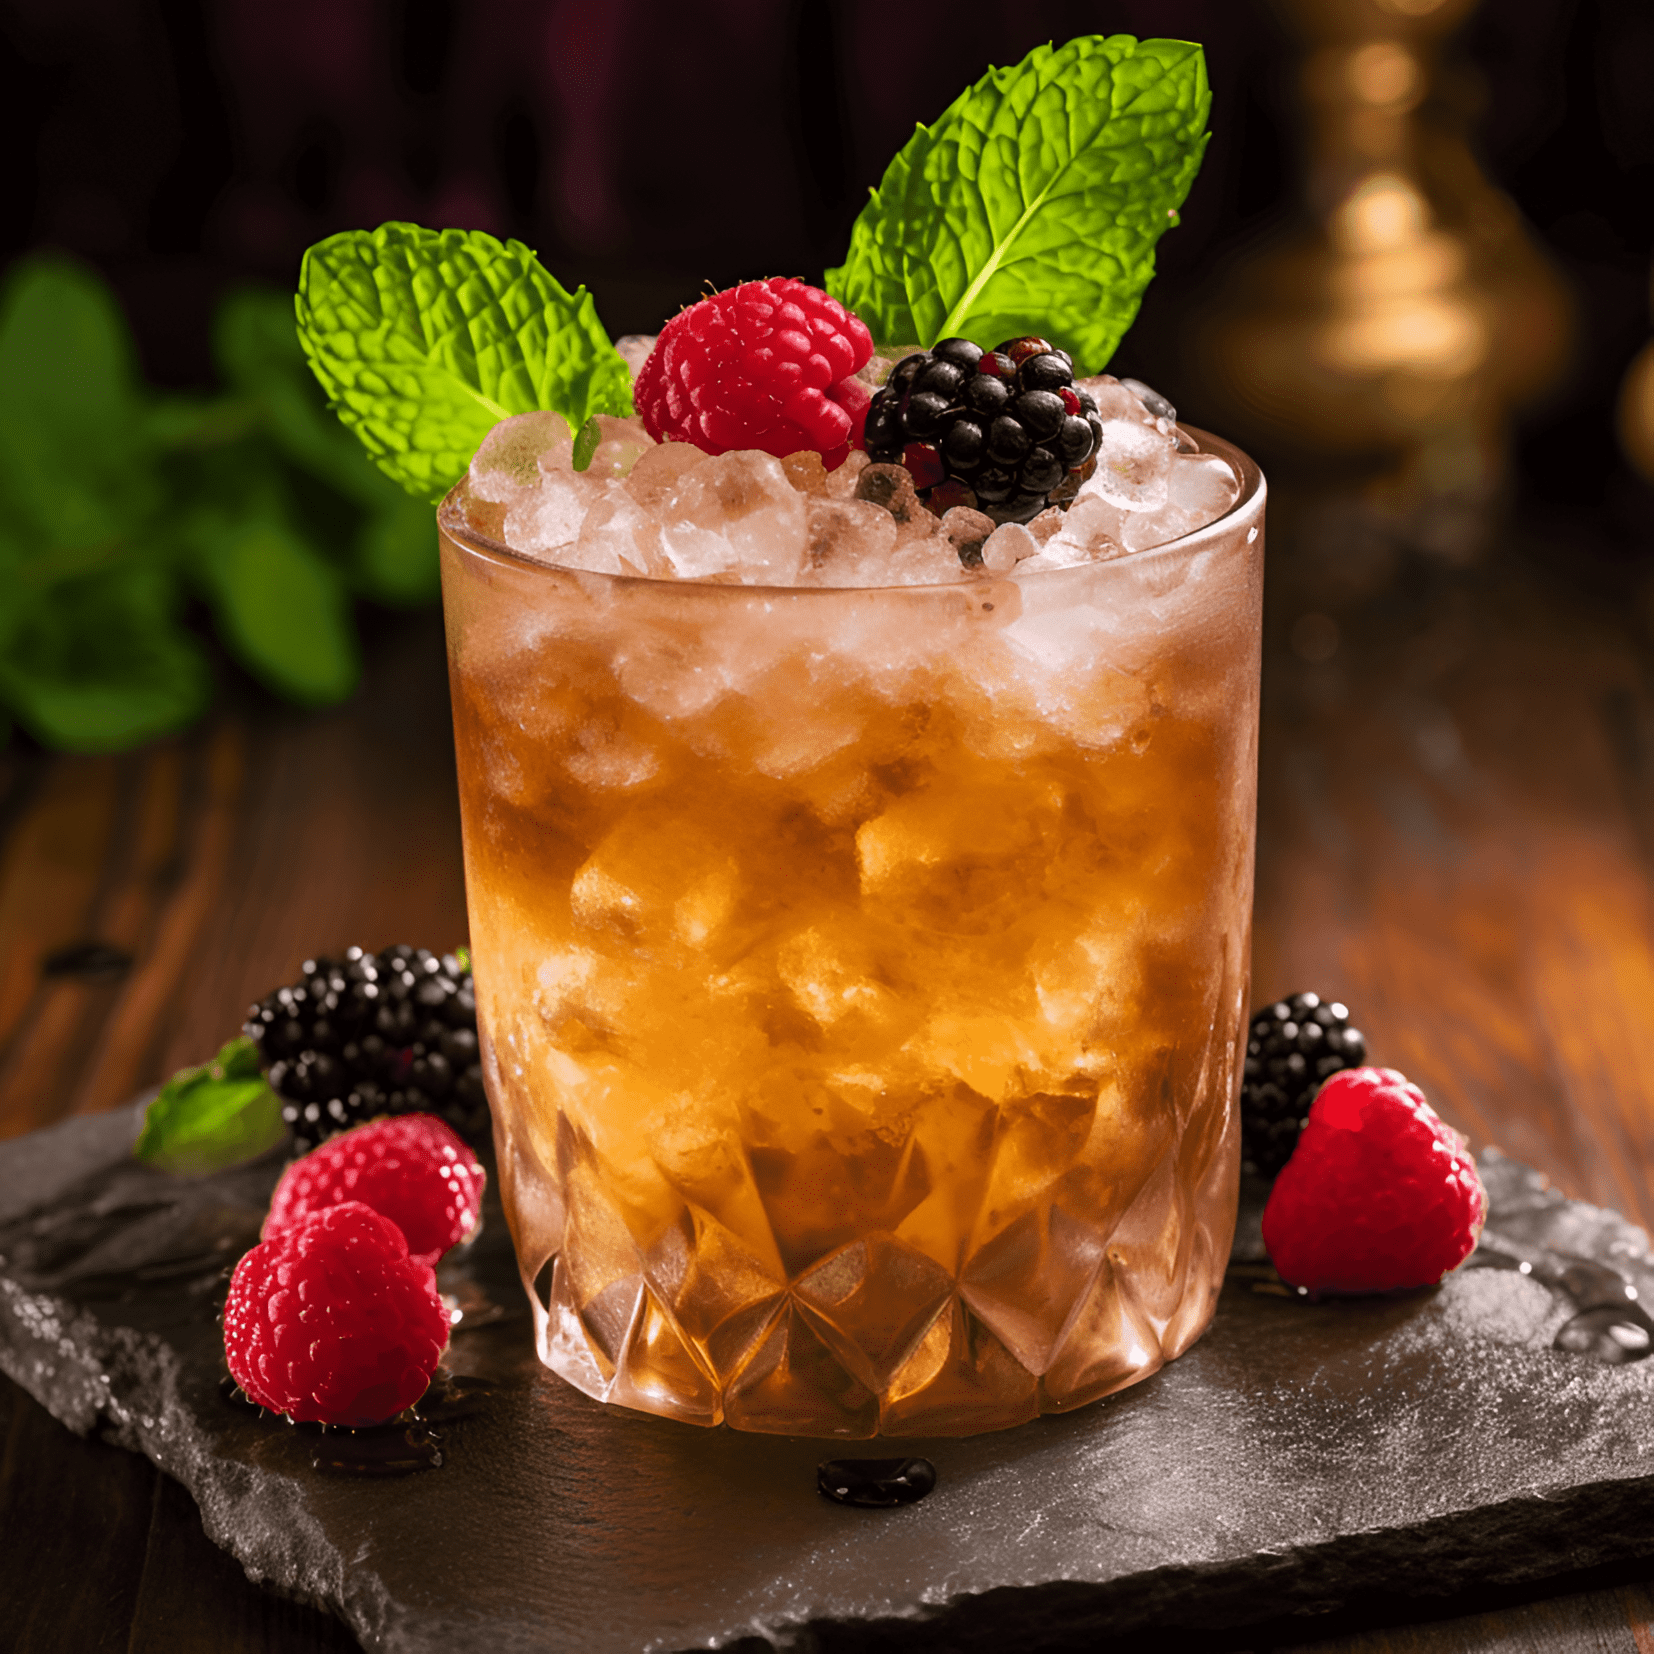 Sherry Cobbler Cocktail Recipe - The Sherry Cobbler has a refreshing, fruity, and slightly sweet taste with a hint of nuttiness from the sherry. The citrus notes from the orange and lemon add a pleasant tartness, while the sugar and crushed ice create a smooth and well-balanced flavor.